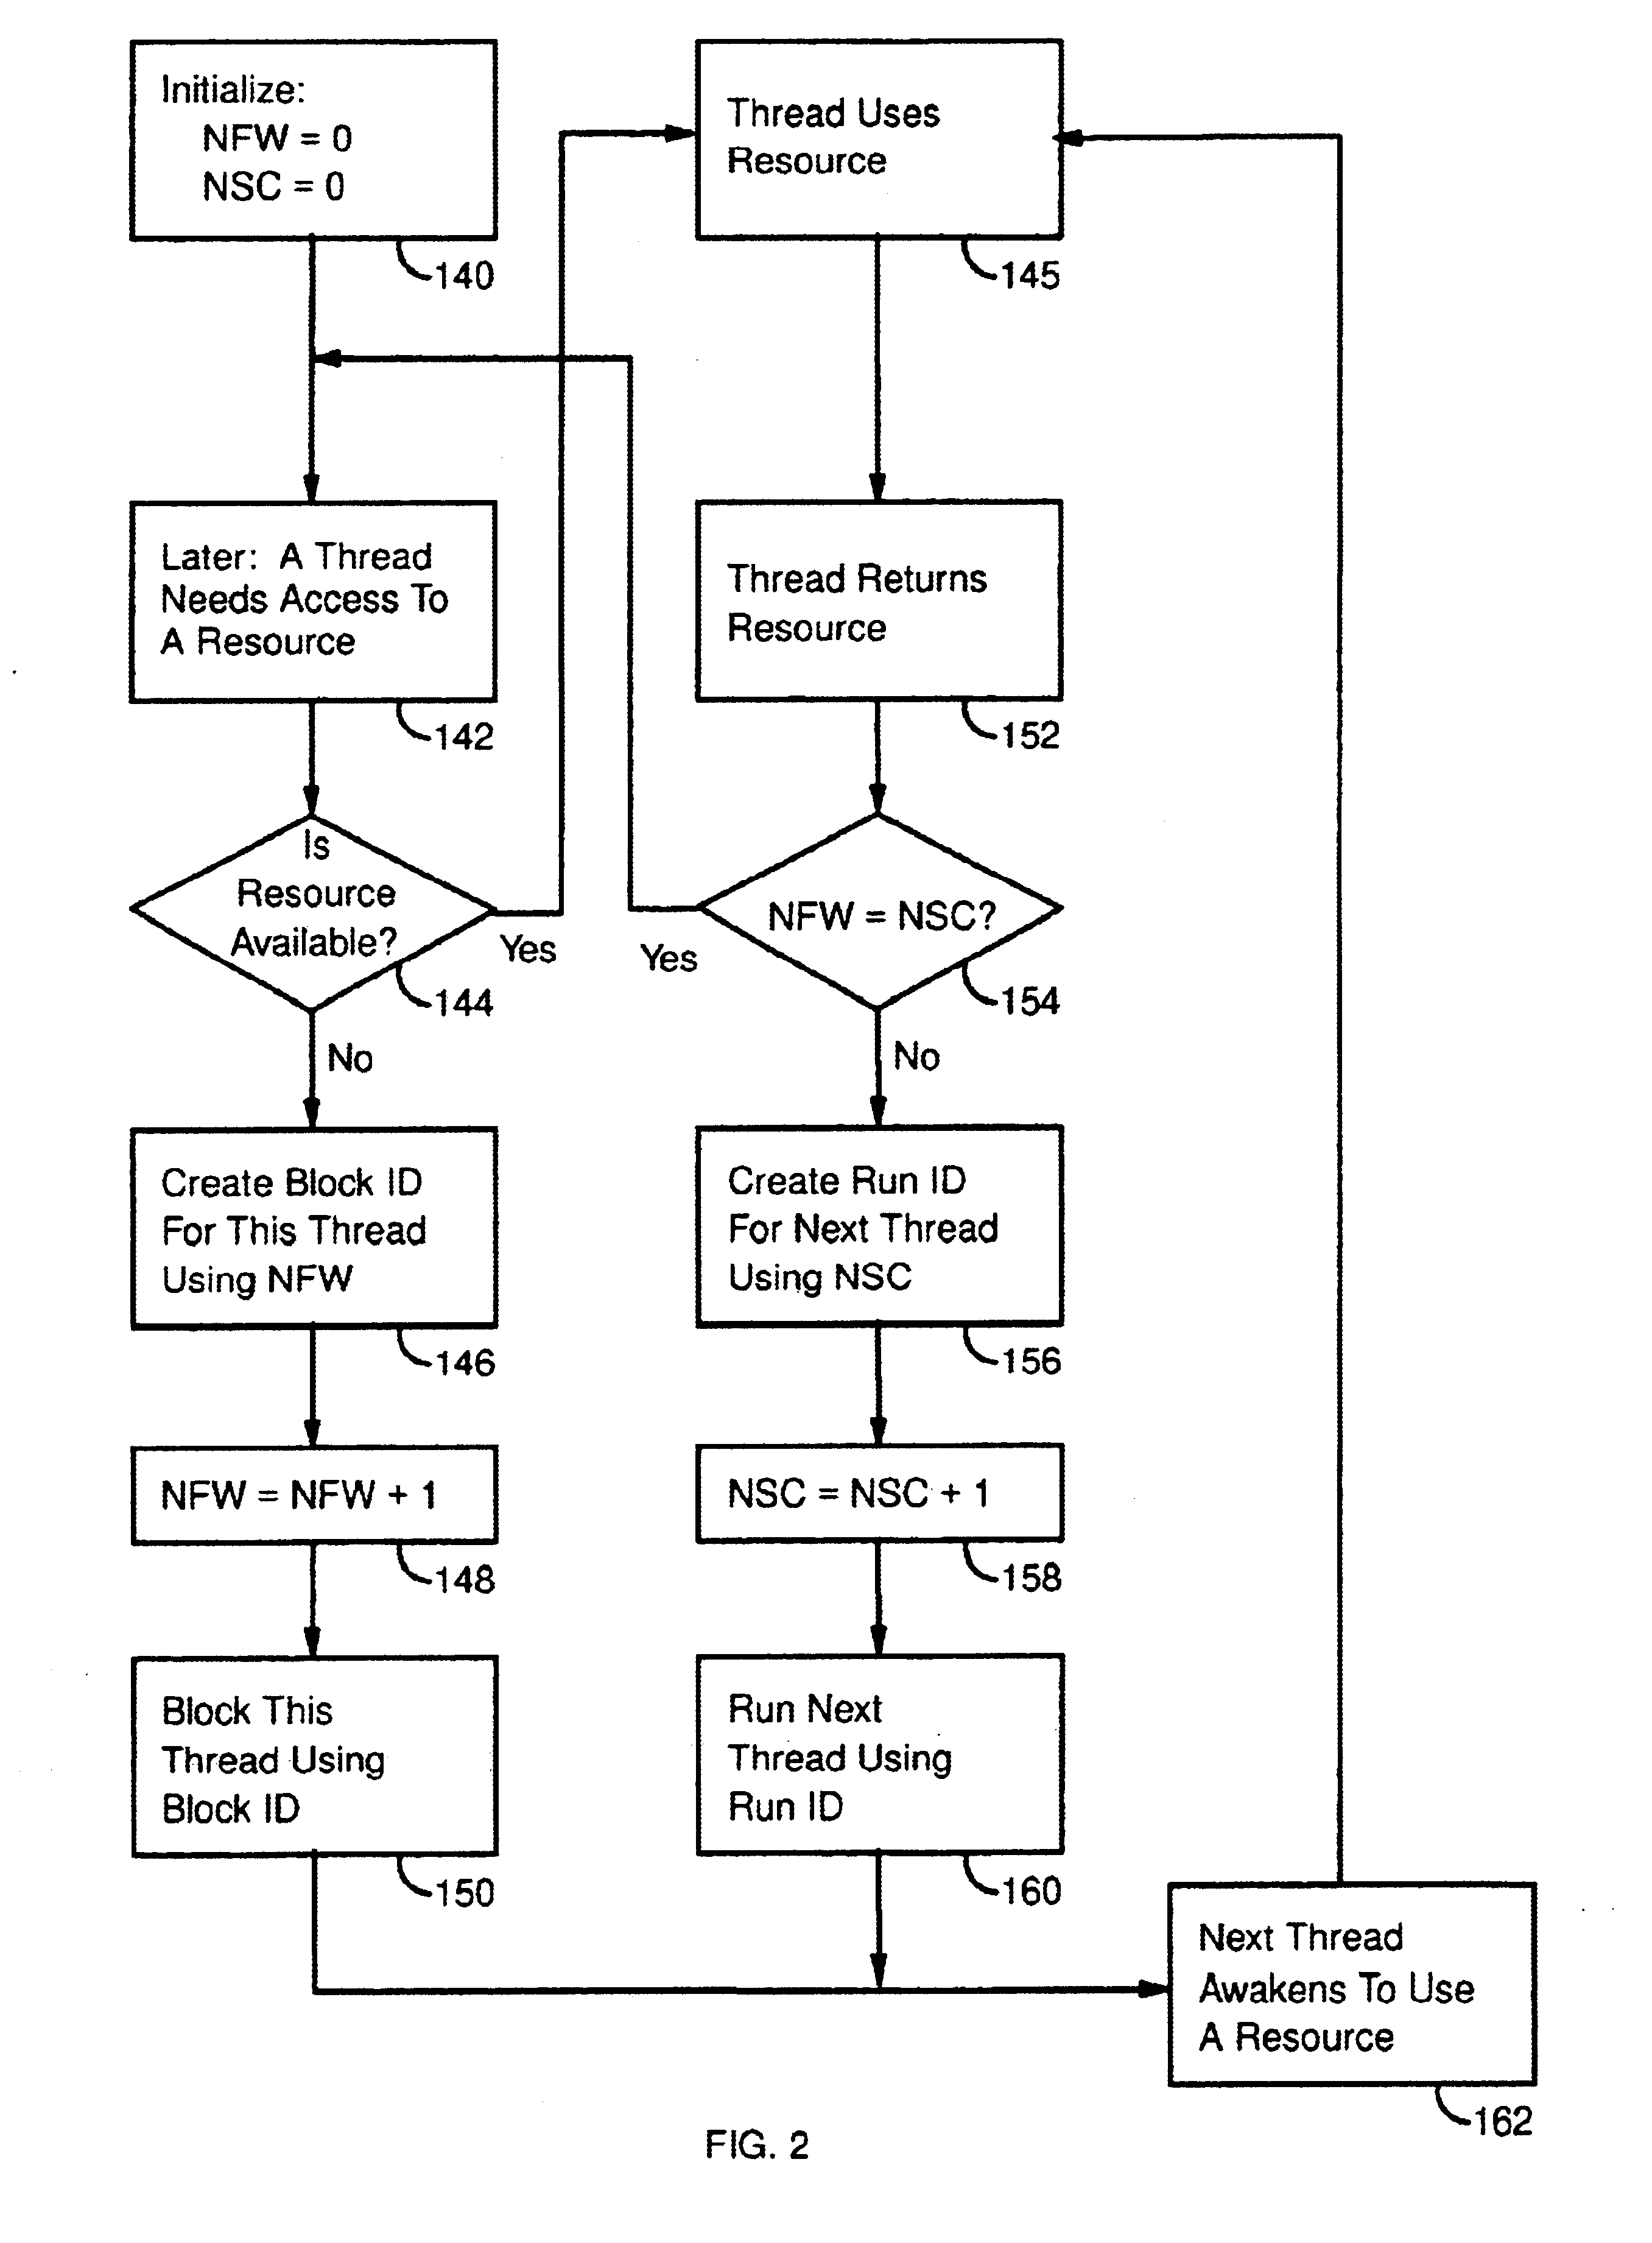 System and method for queue-less enforcement of queue-like behavior on multiple threads accessing a scarce source